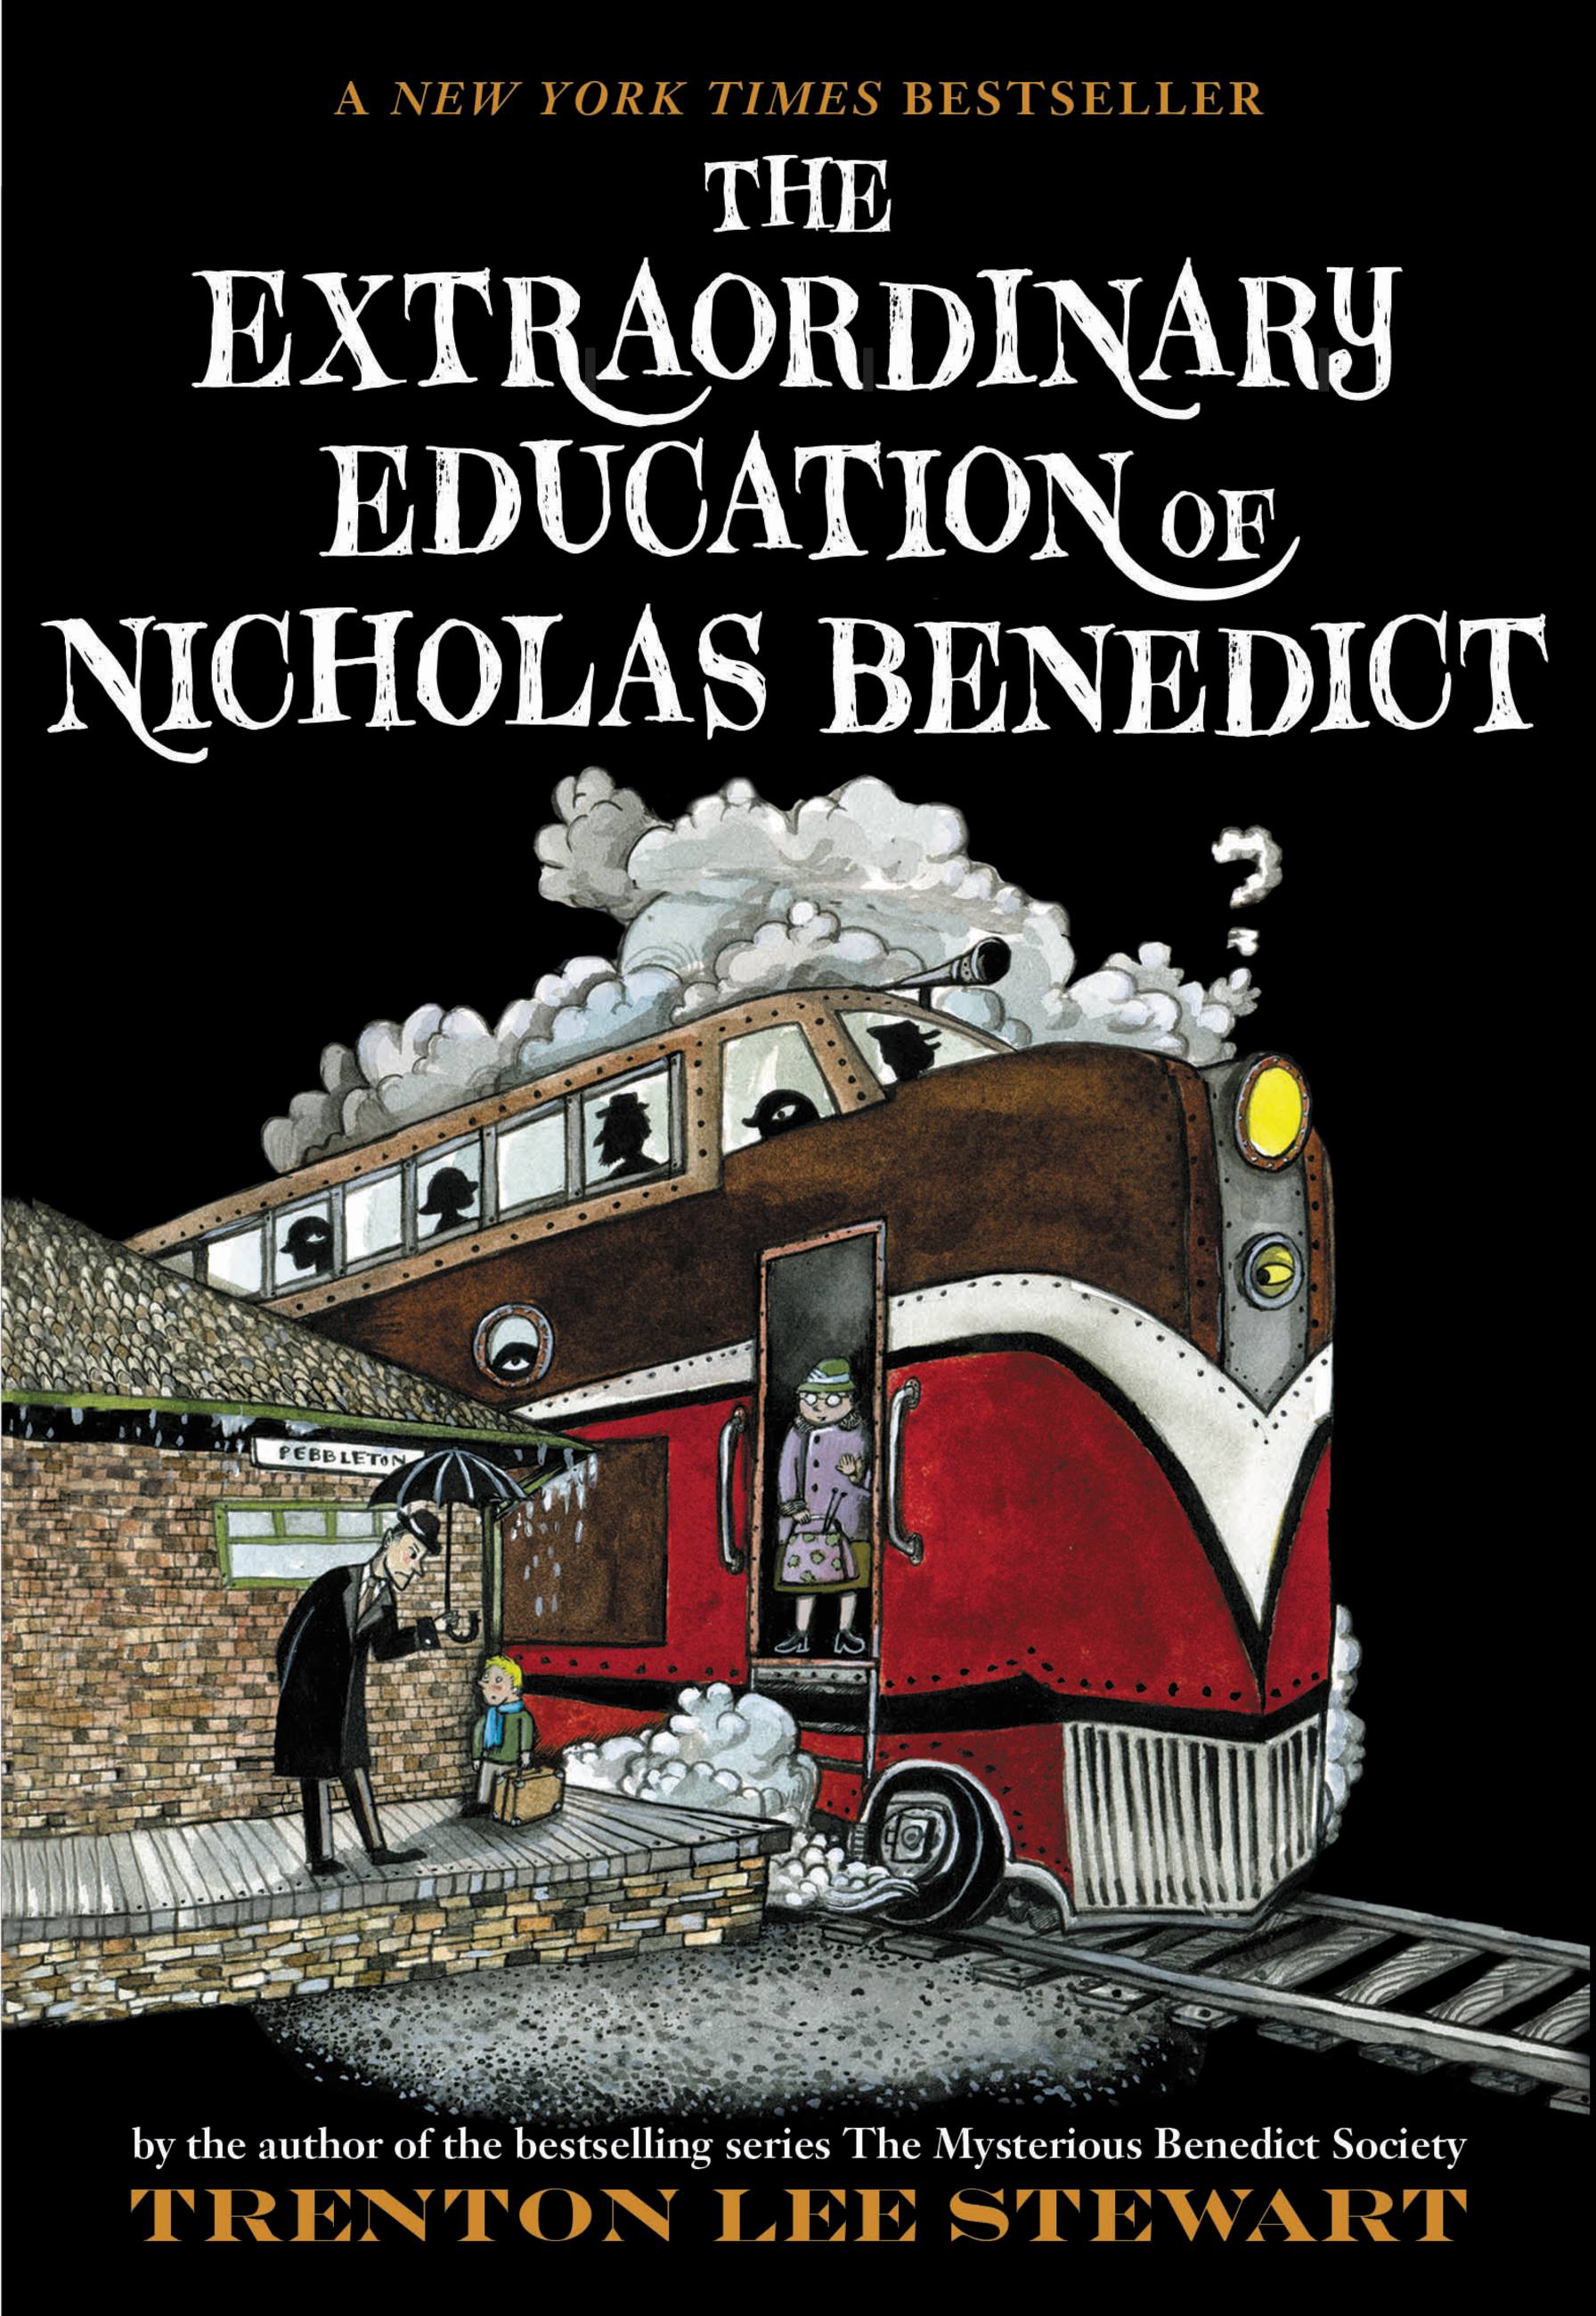 The Extraordinary Education of Nicholas Benedict by Trenton Lee Stewart |  Hachette Book Group